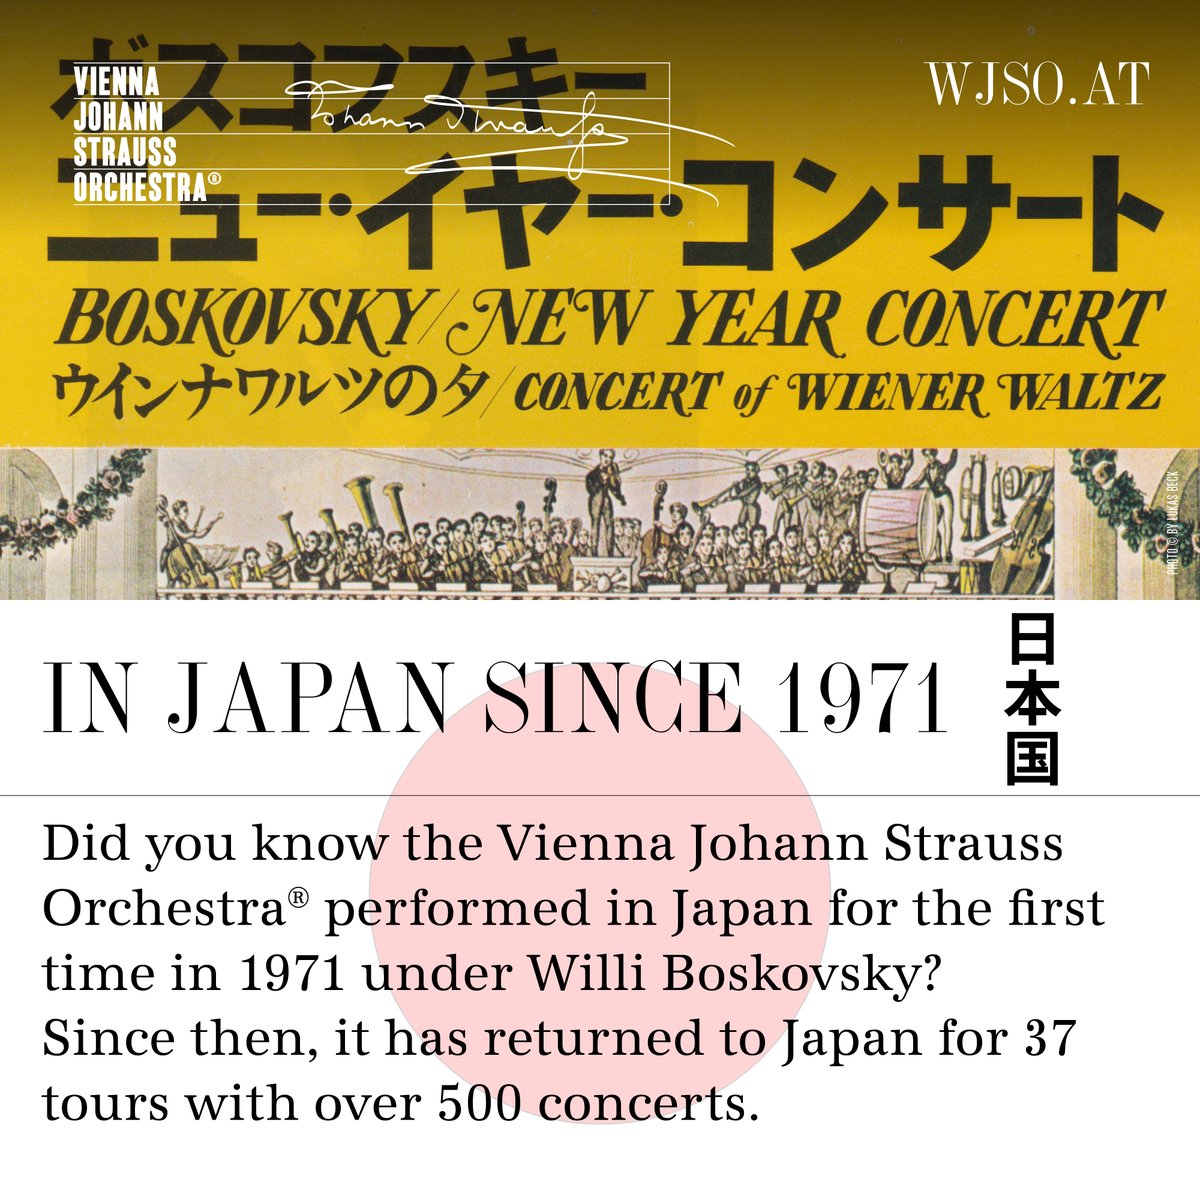 ➡️ All concerts in Japan since 1971: ow.ly/Y2Es50zq5RY
🌐 オーケストラの日本語サイト: wjso.or.at/ja-jp/

#WJSO #music #musica #musical #heritage #音楽 #classicalmusic #クラシック音楽 #johannstrauss #tradition  #orchester #orchestra #orquesta #wien